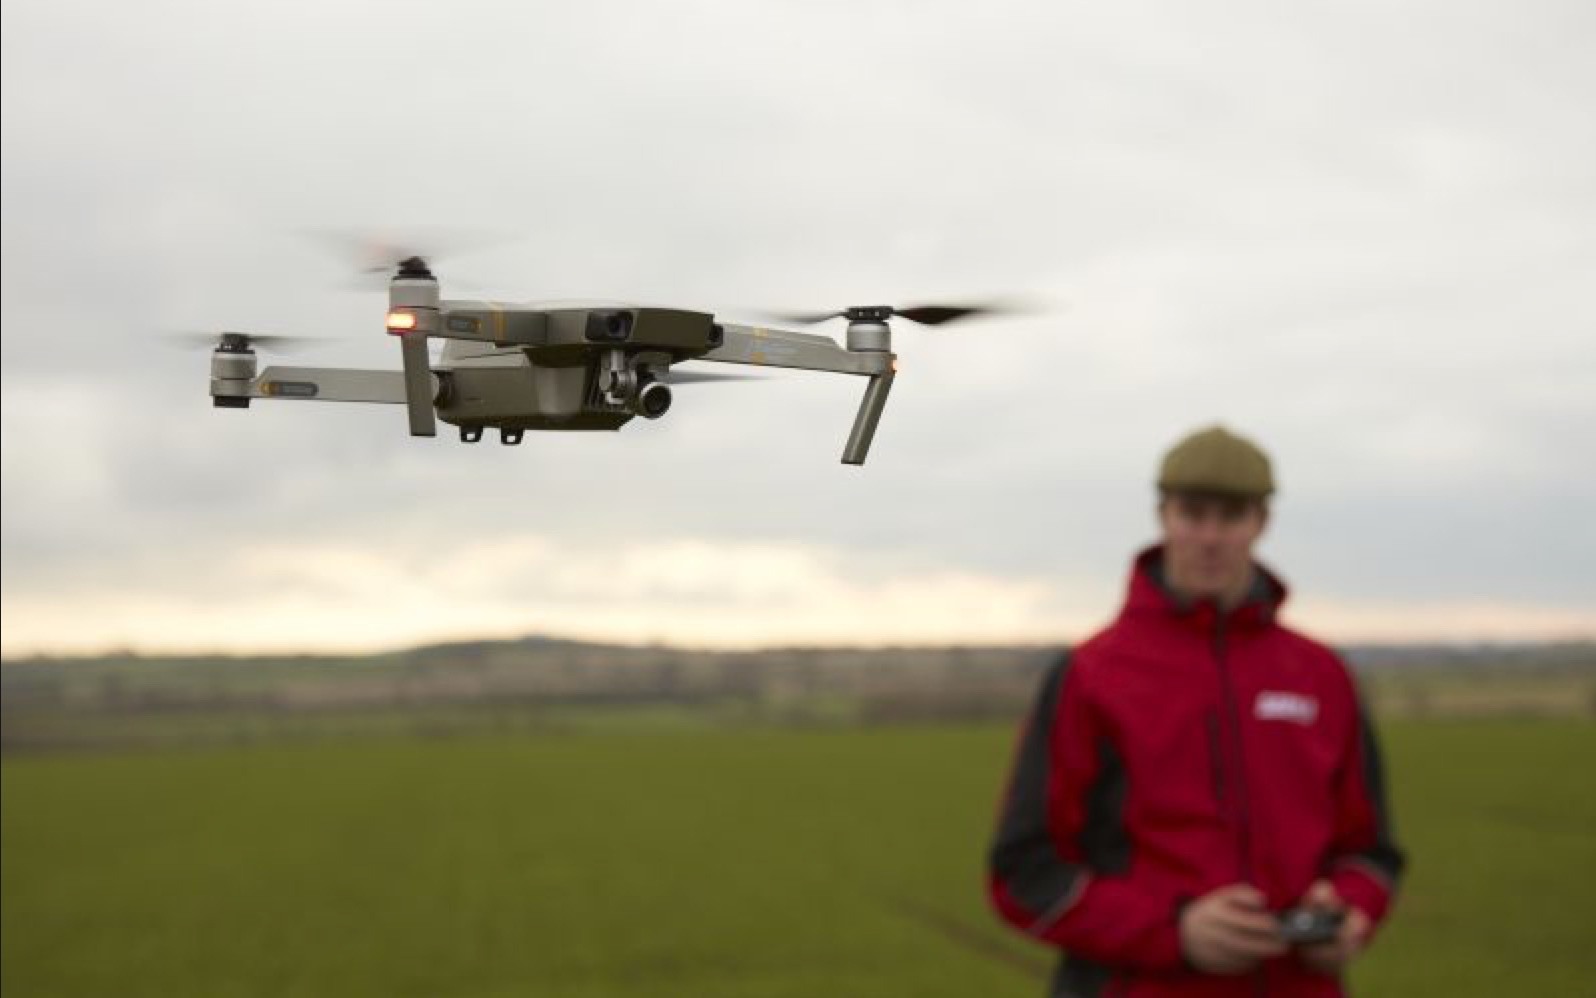 UK farmers could face hefty fines for breaking drone rules